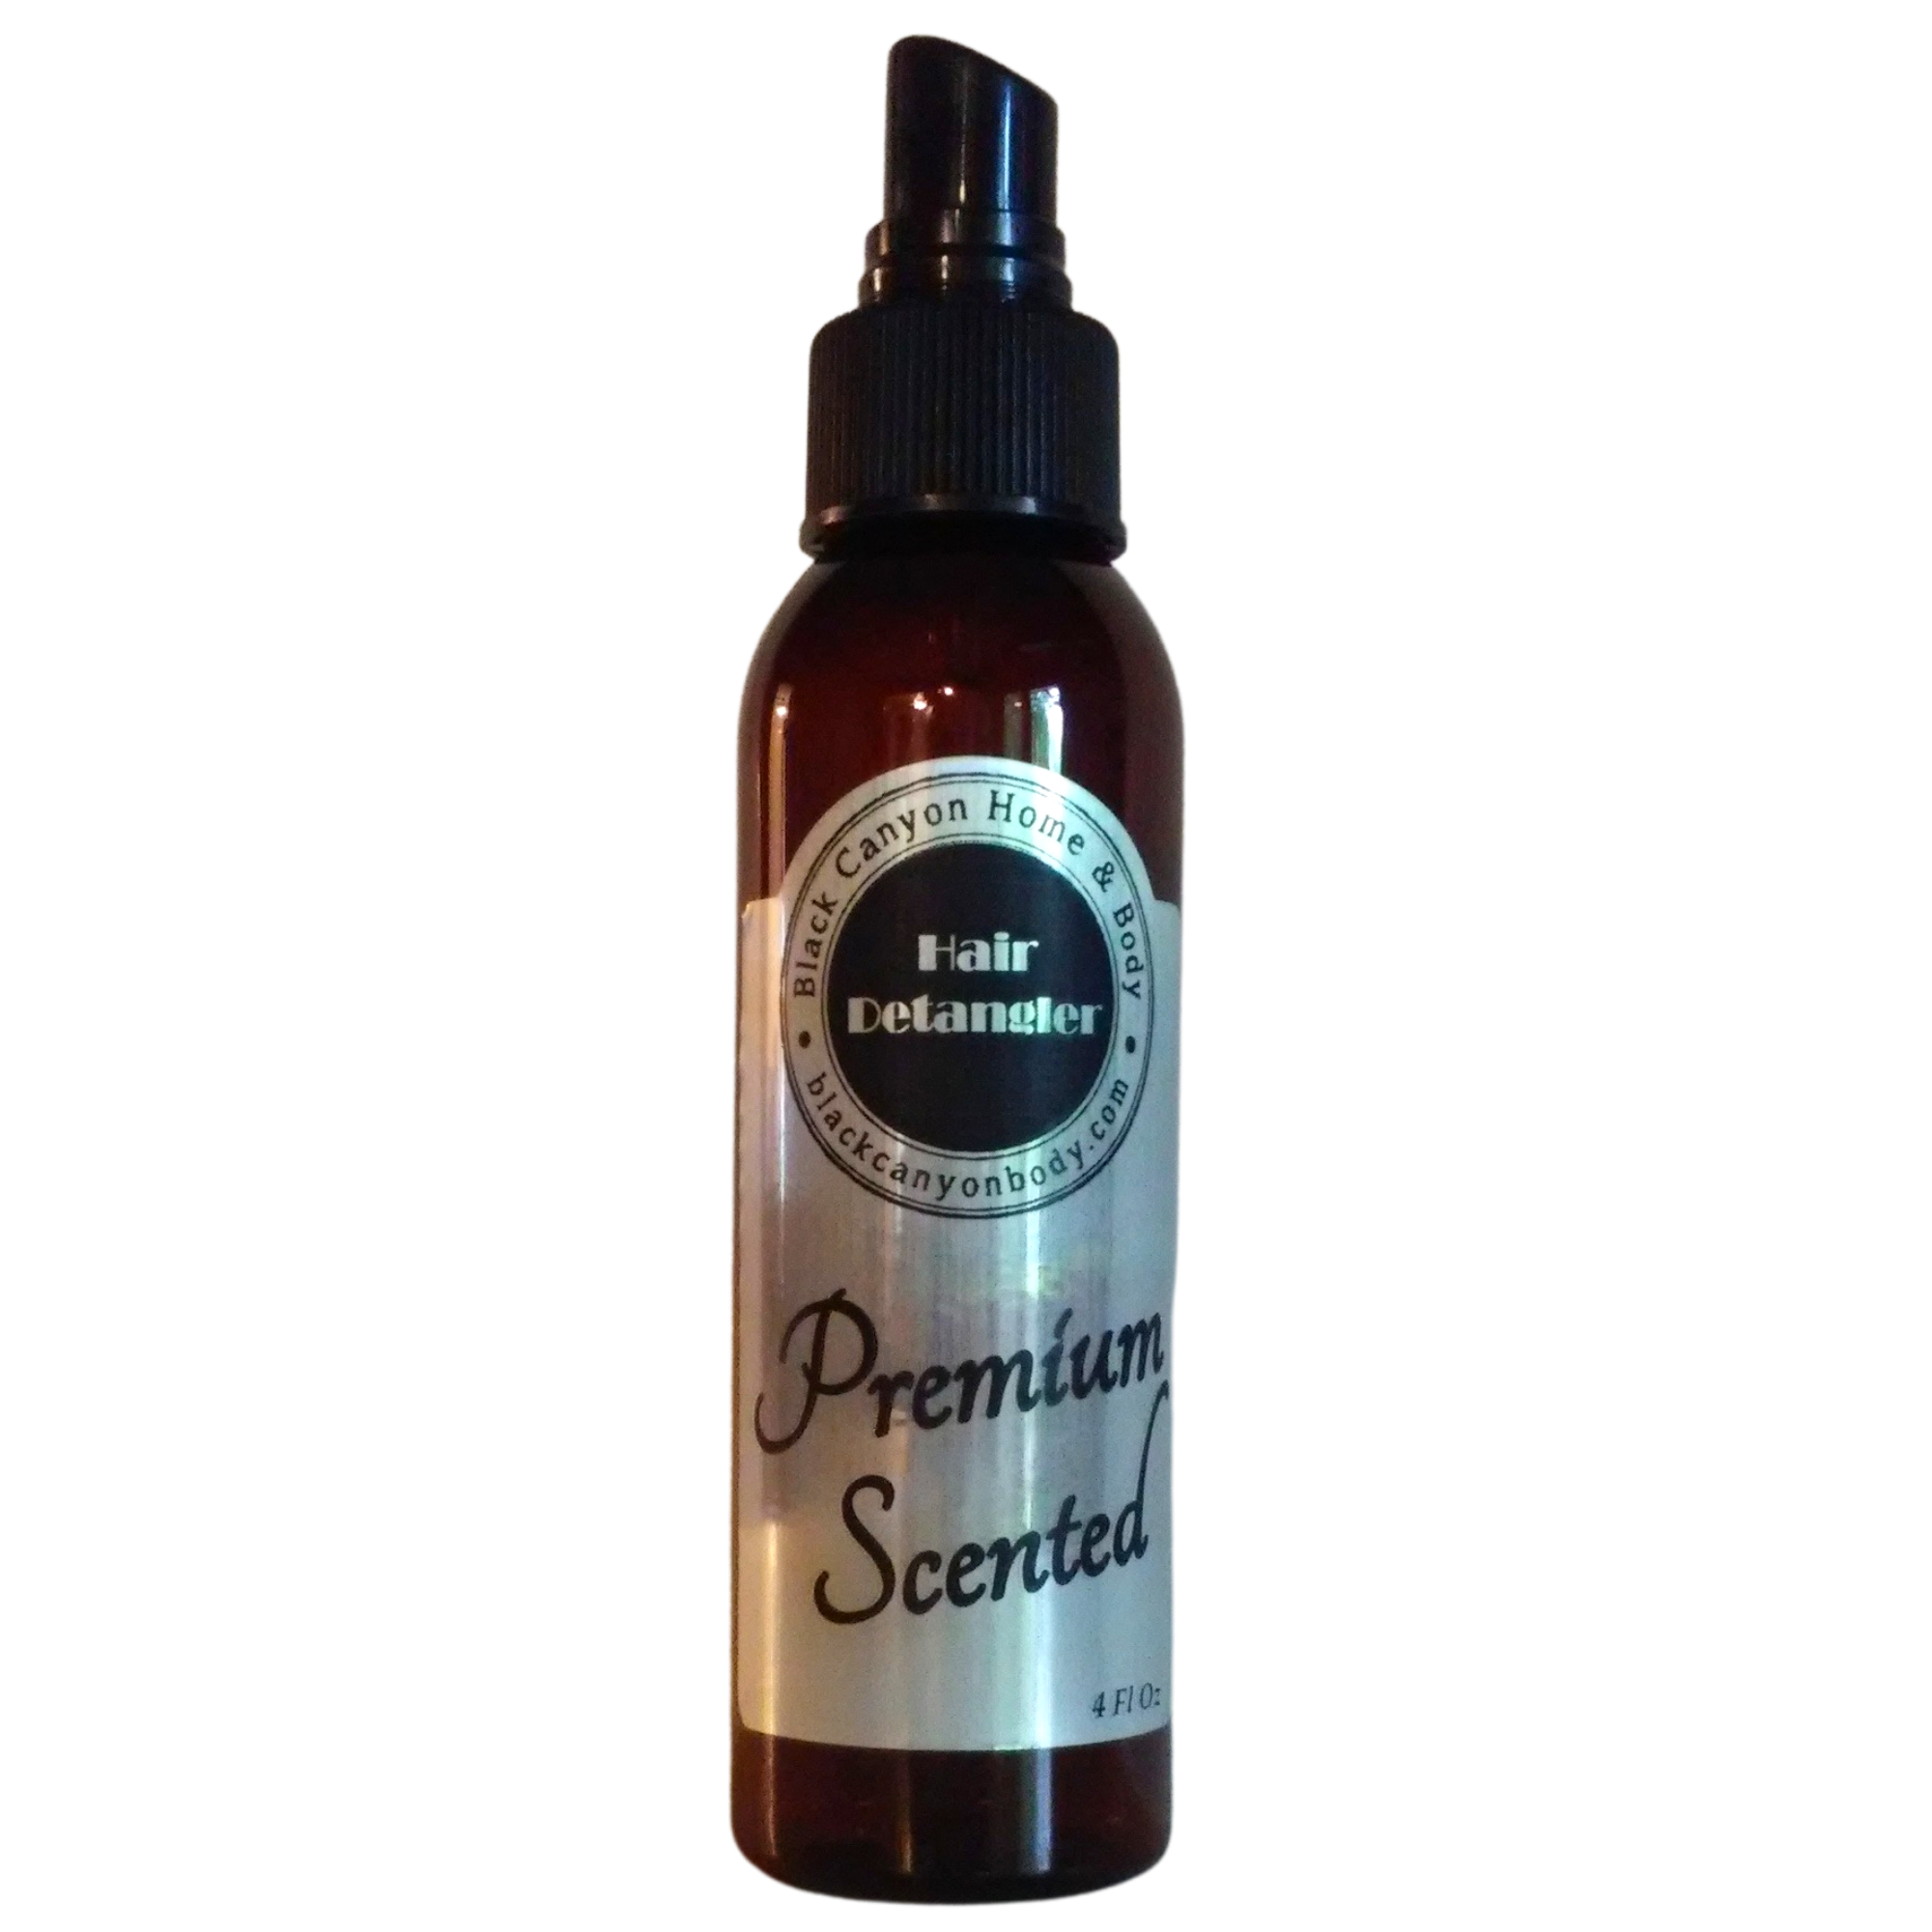 Black Canyon Cranberry & Clementine Scented Hair Detangler Spray with Olive Oil